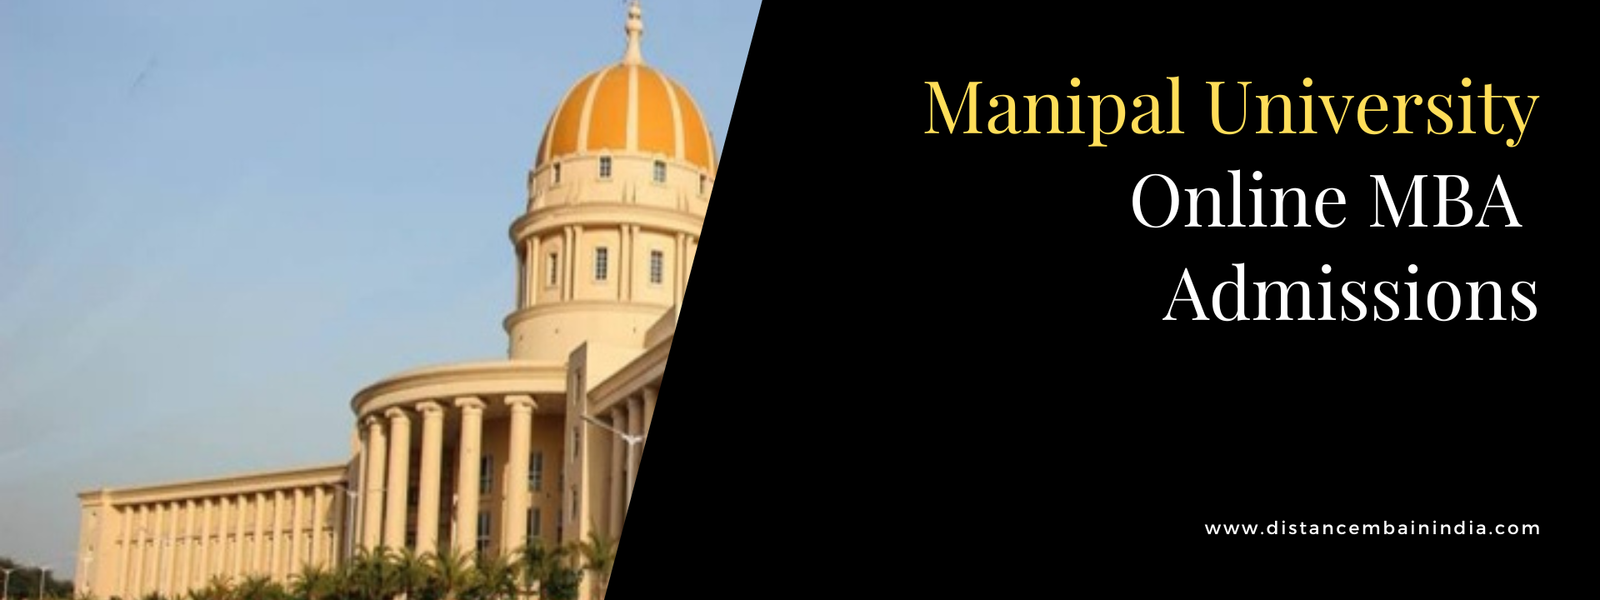 Manipal University Online MBA Admissions